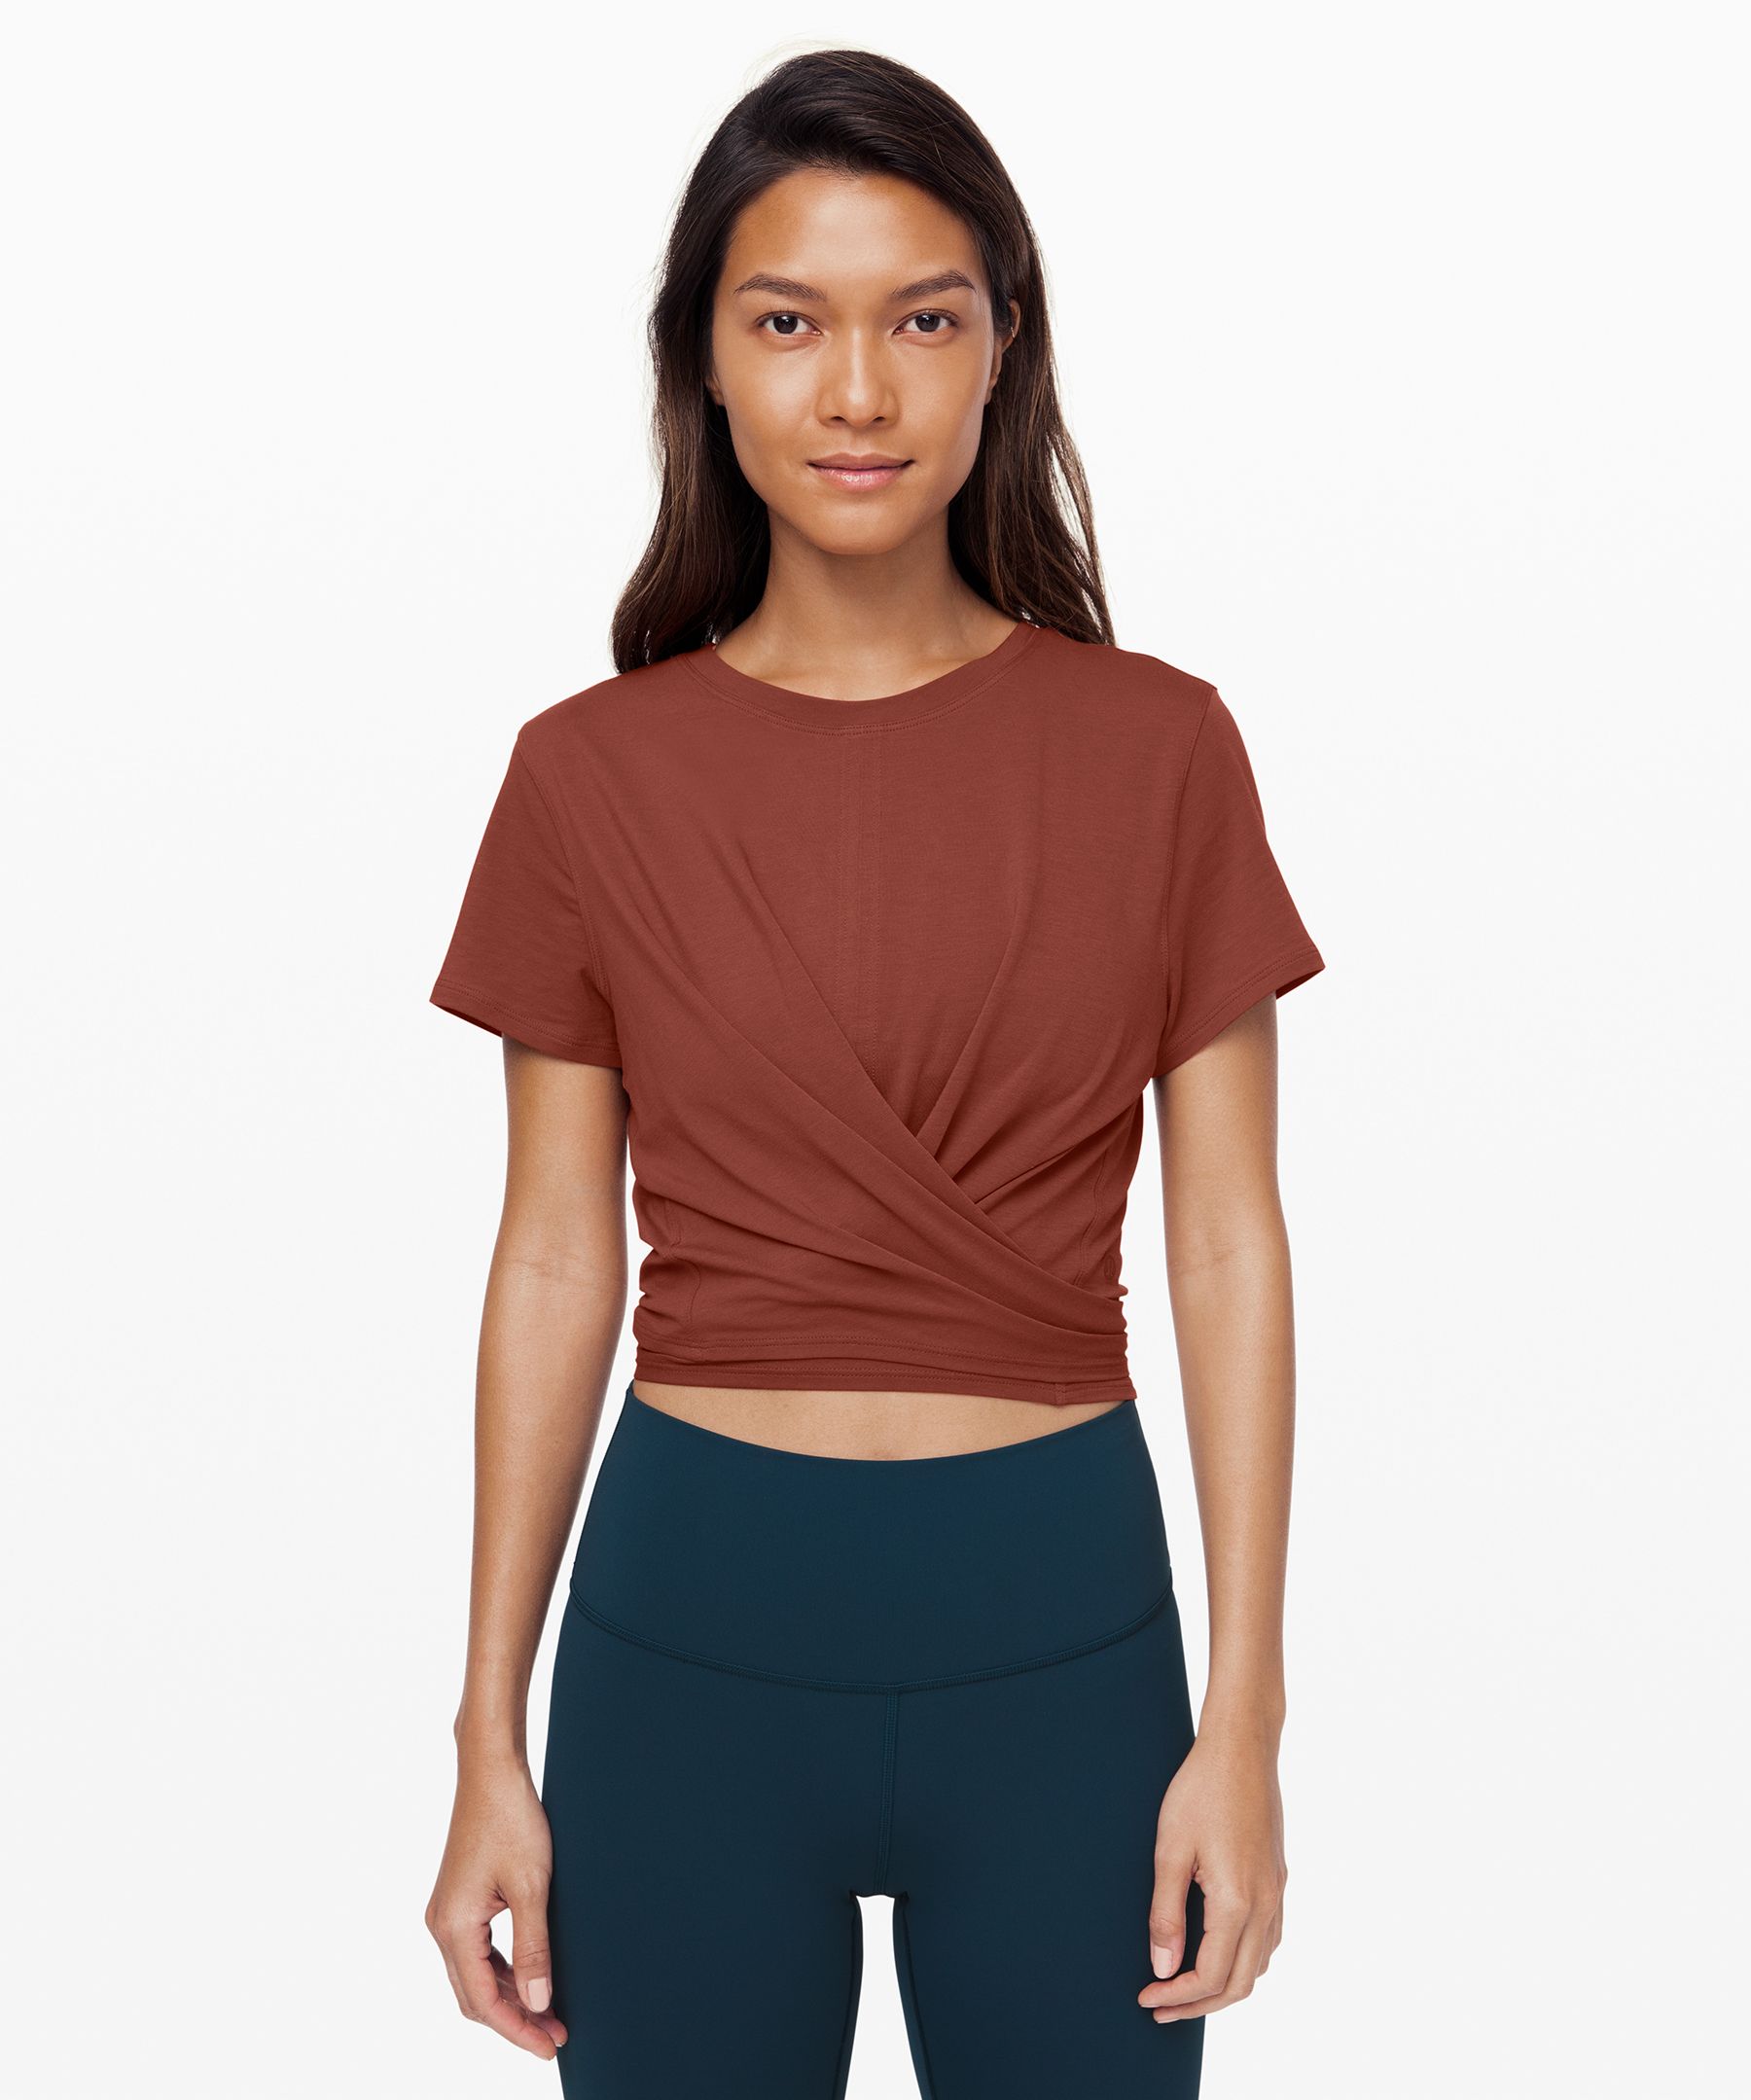 Lululemon Time To Restore Short Sleeve In Rustic Clay